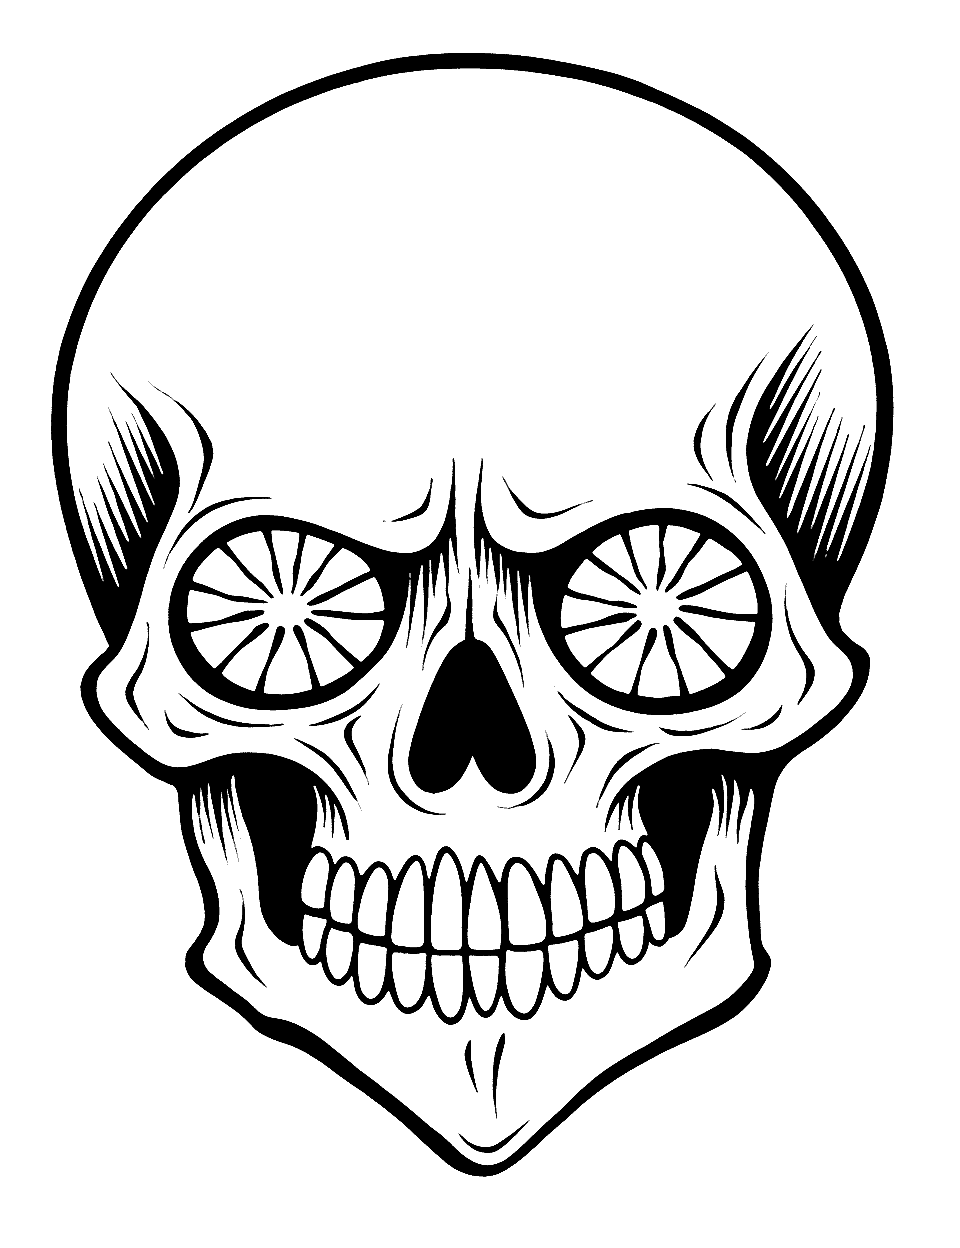 Easy Peasy Lemon Squeezy Coloring Page - A simple skull with a lemon slice as eyes, aimed at beginners.